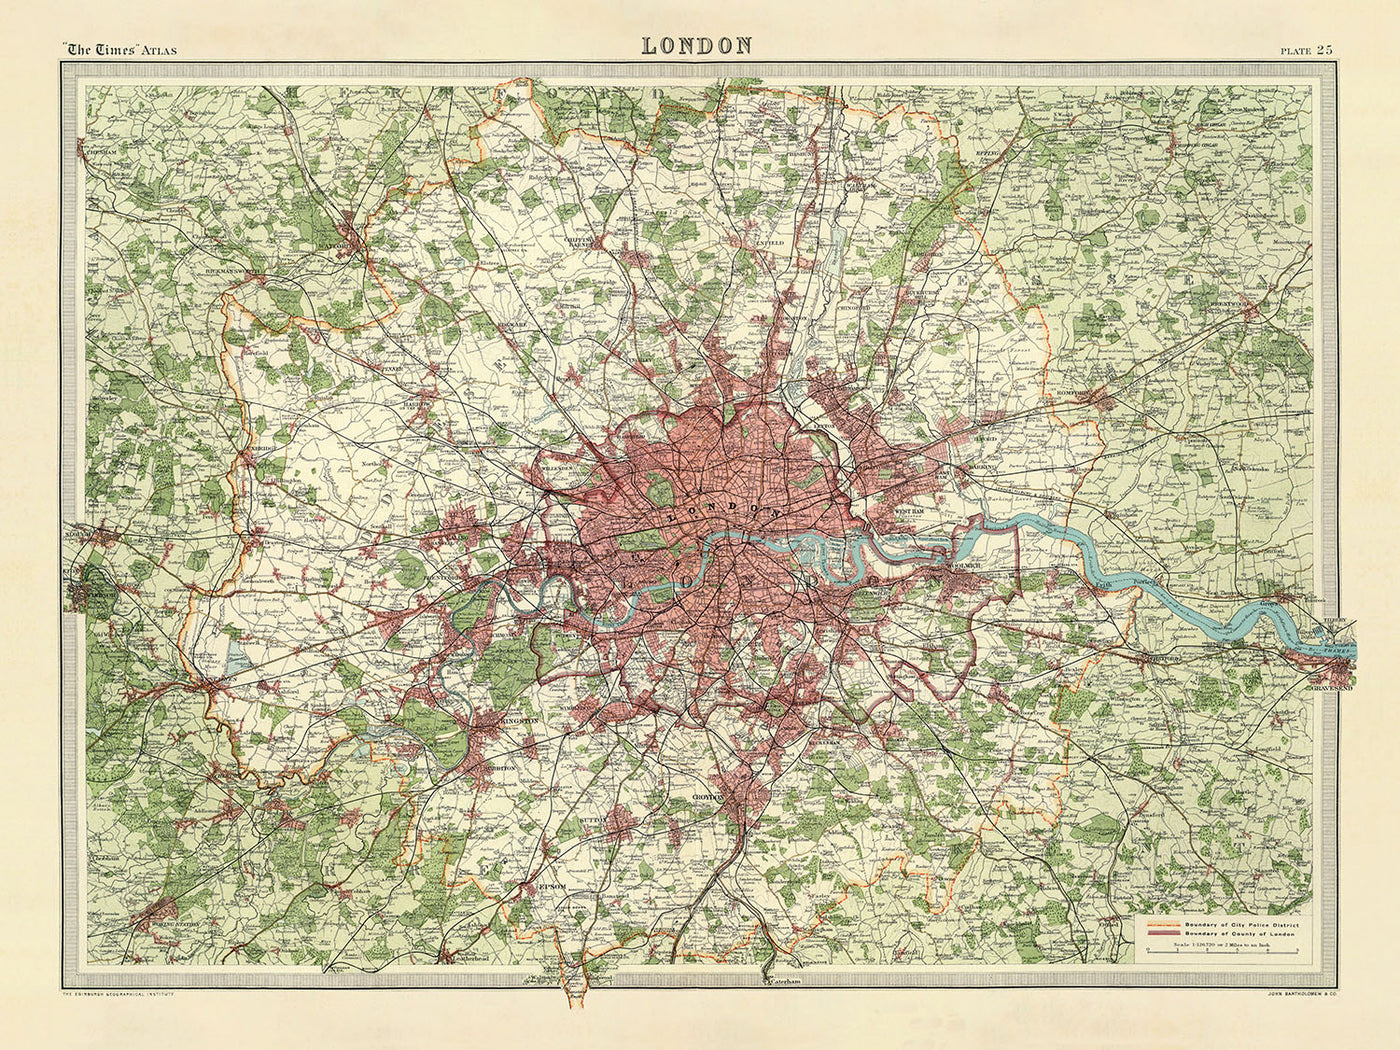 Old Map of Greater London, 1922: Thames, Small Scale, Suburbs